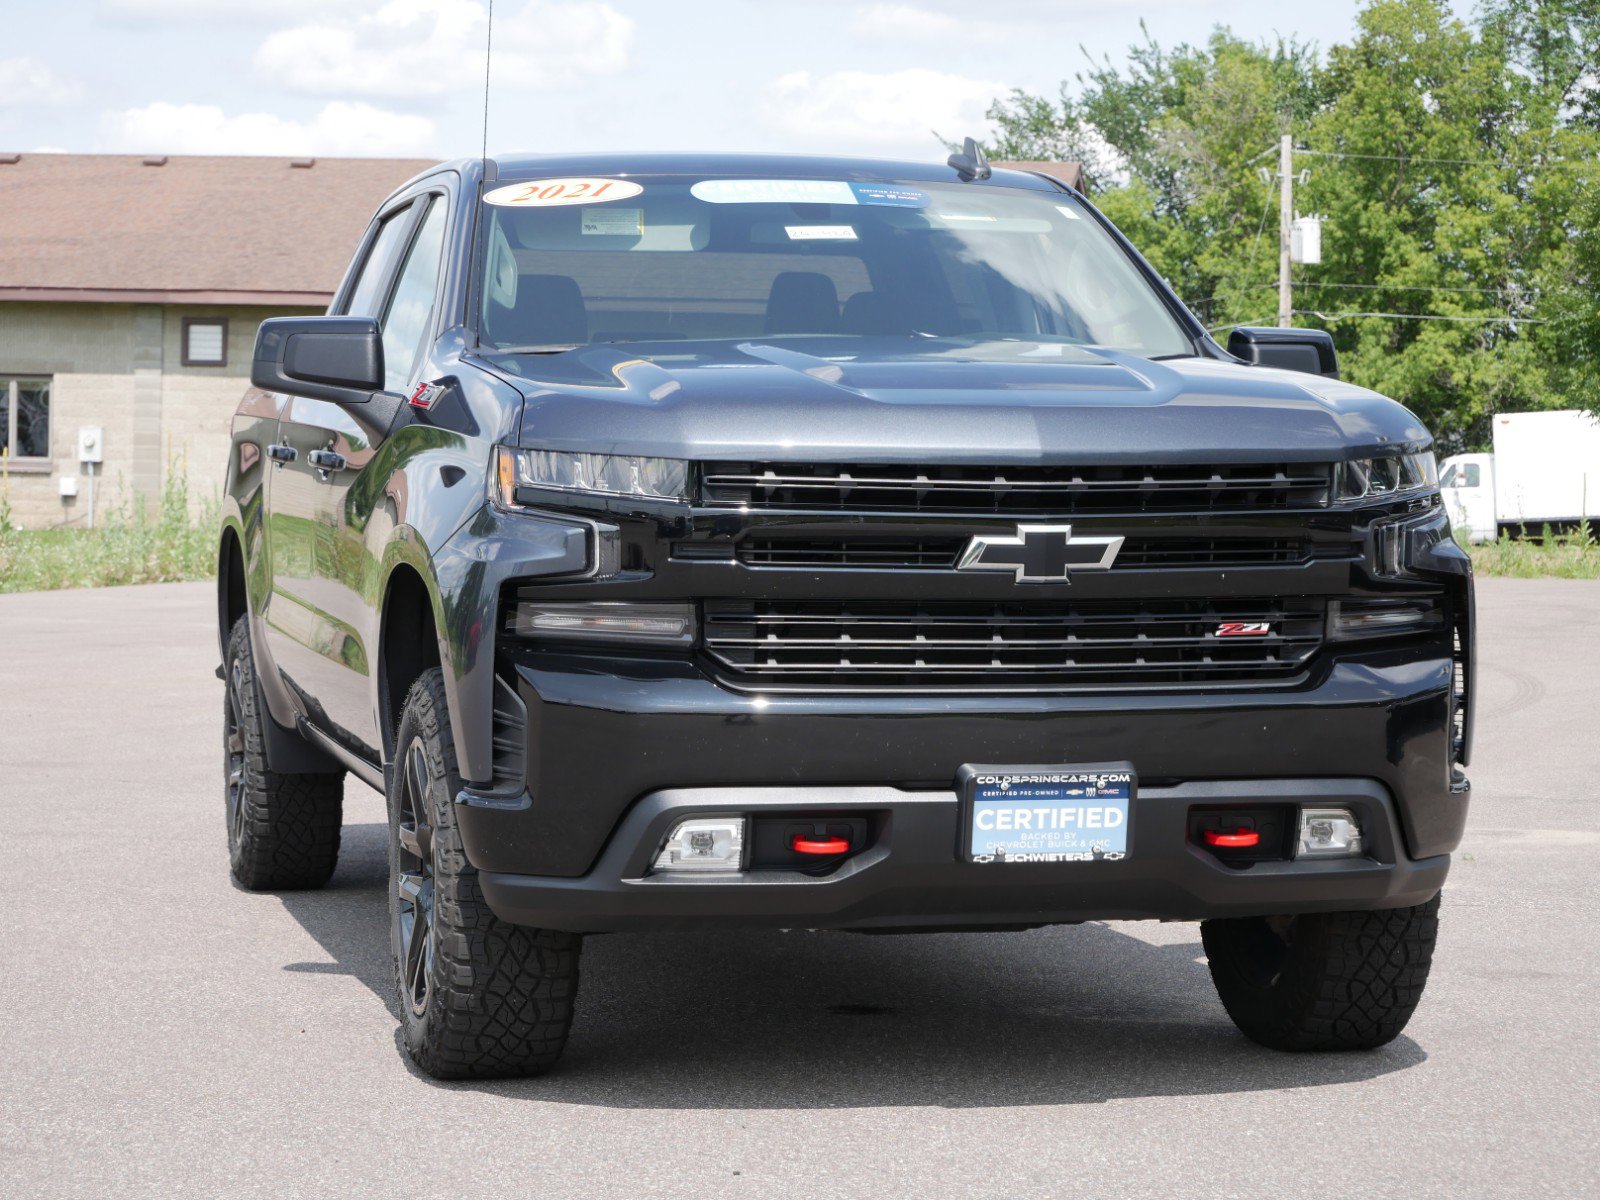 Certified 2021 Chevrolet Silverado 1500 LT Trail Boss with VIN 1GCPYFED6MZ426850 for sale in Cold Spring, Minnesota